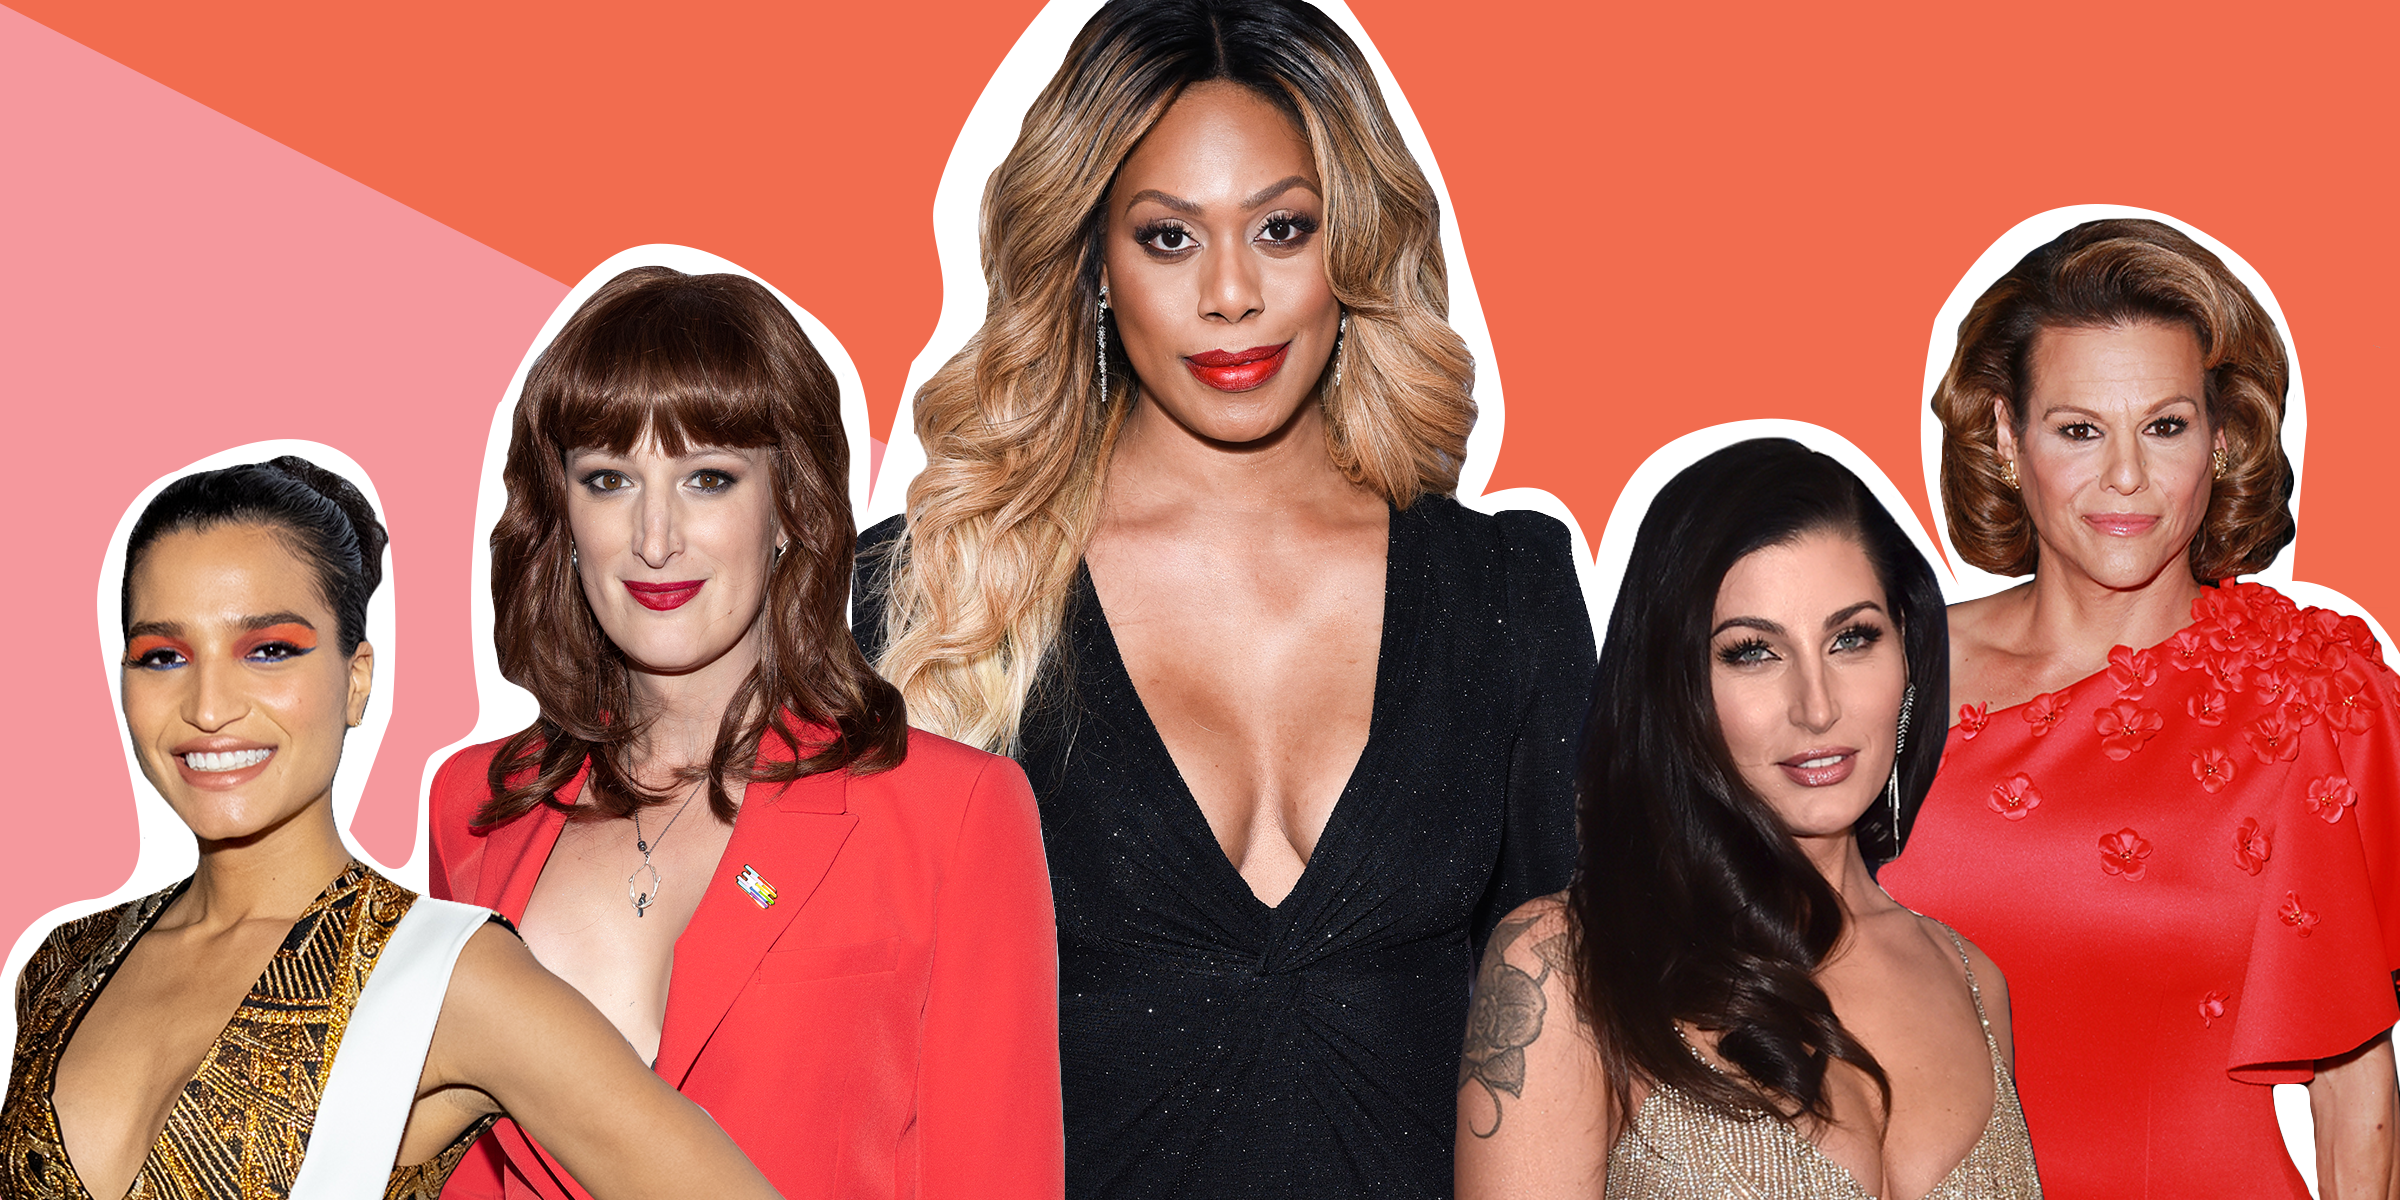 Meet the Trans Women Transforming Television and Beyond pic